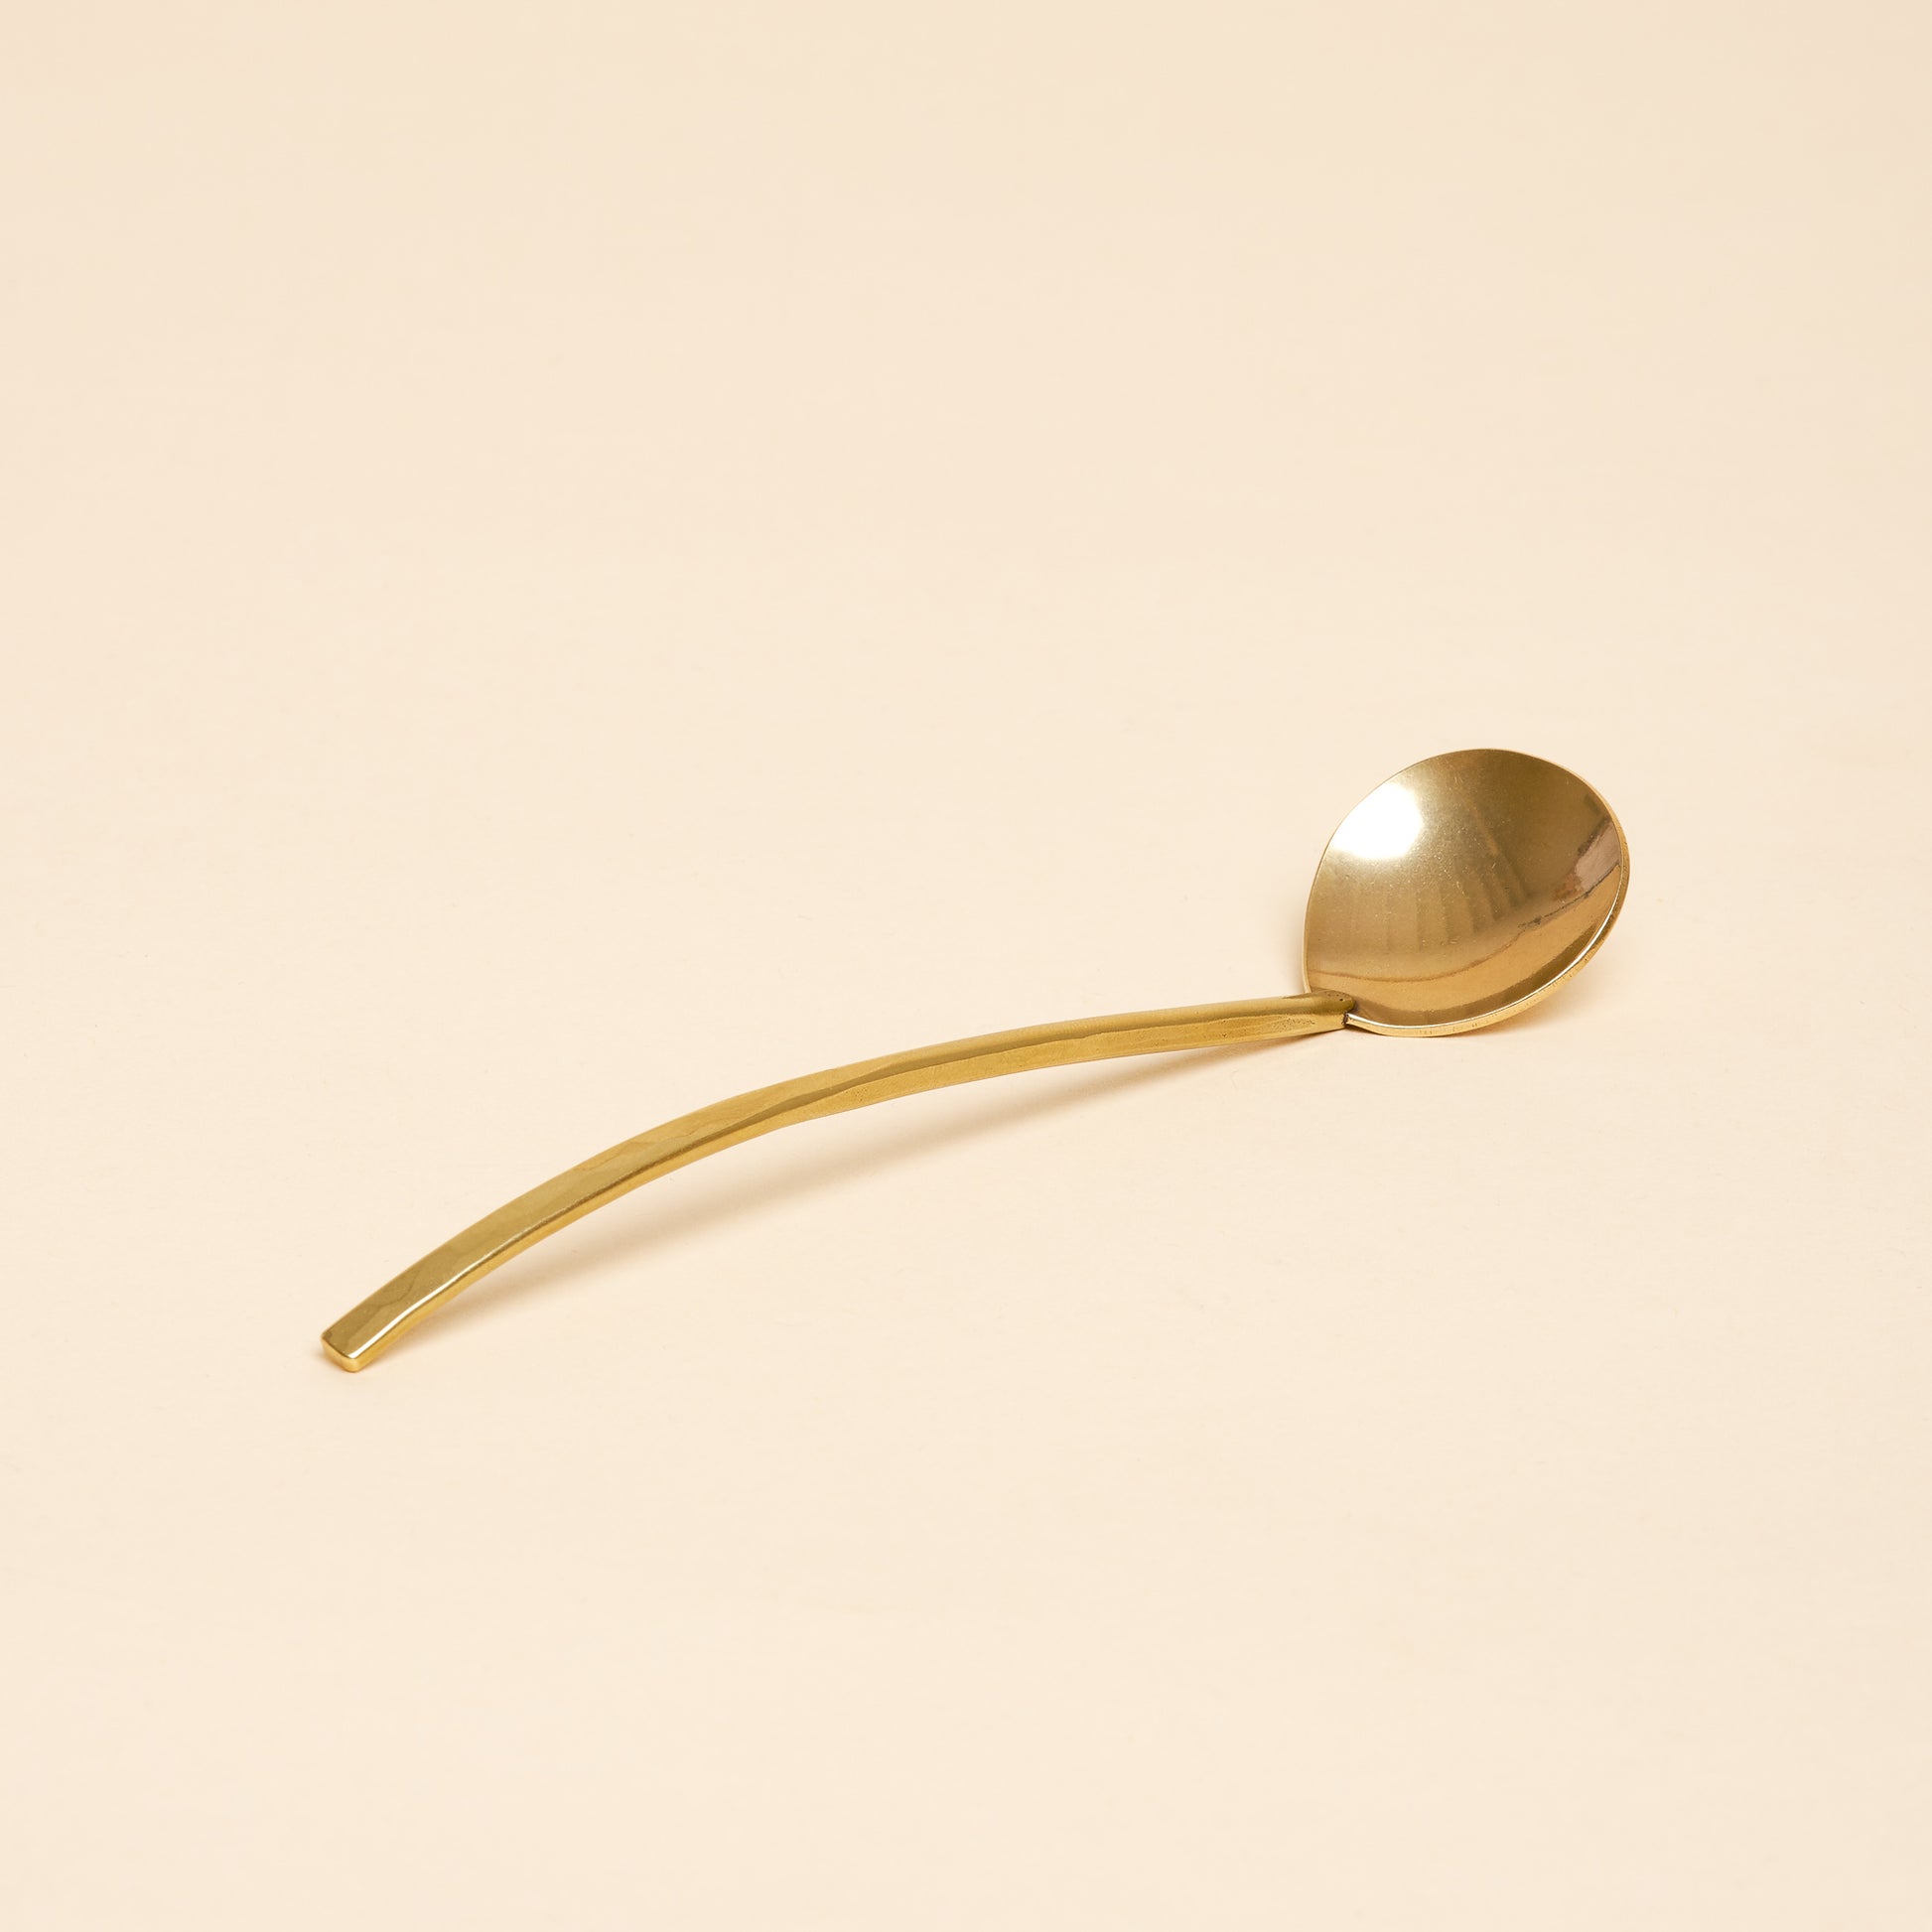 A miniature ladle designed for small scoops, from sugar to salt.